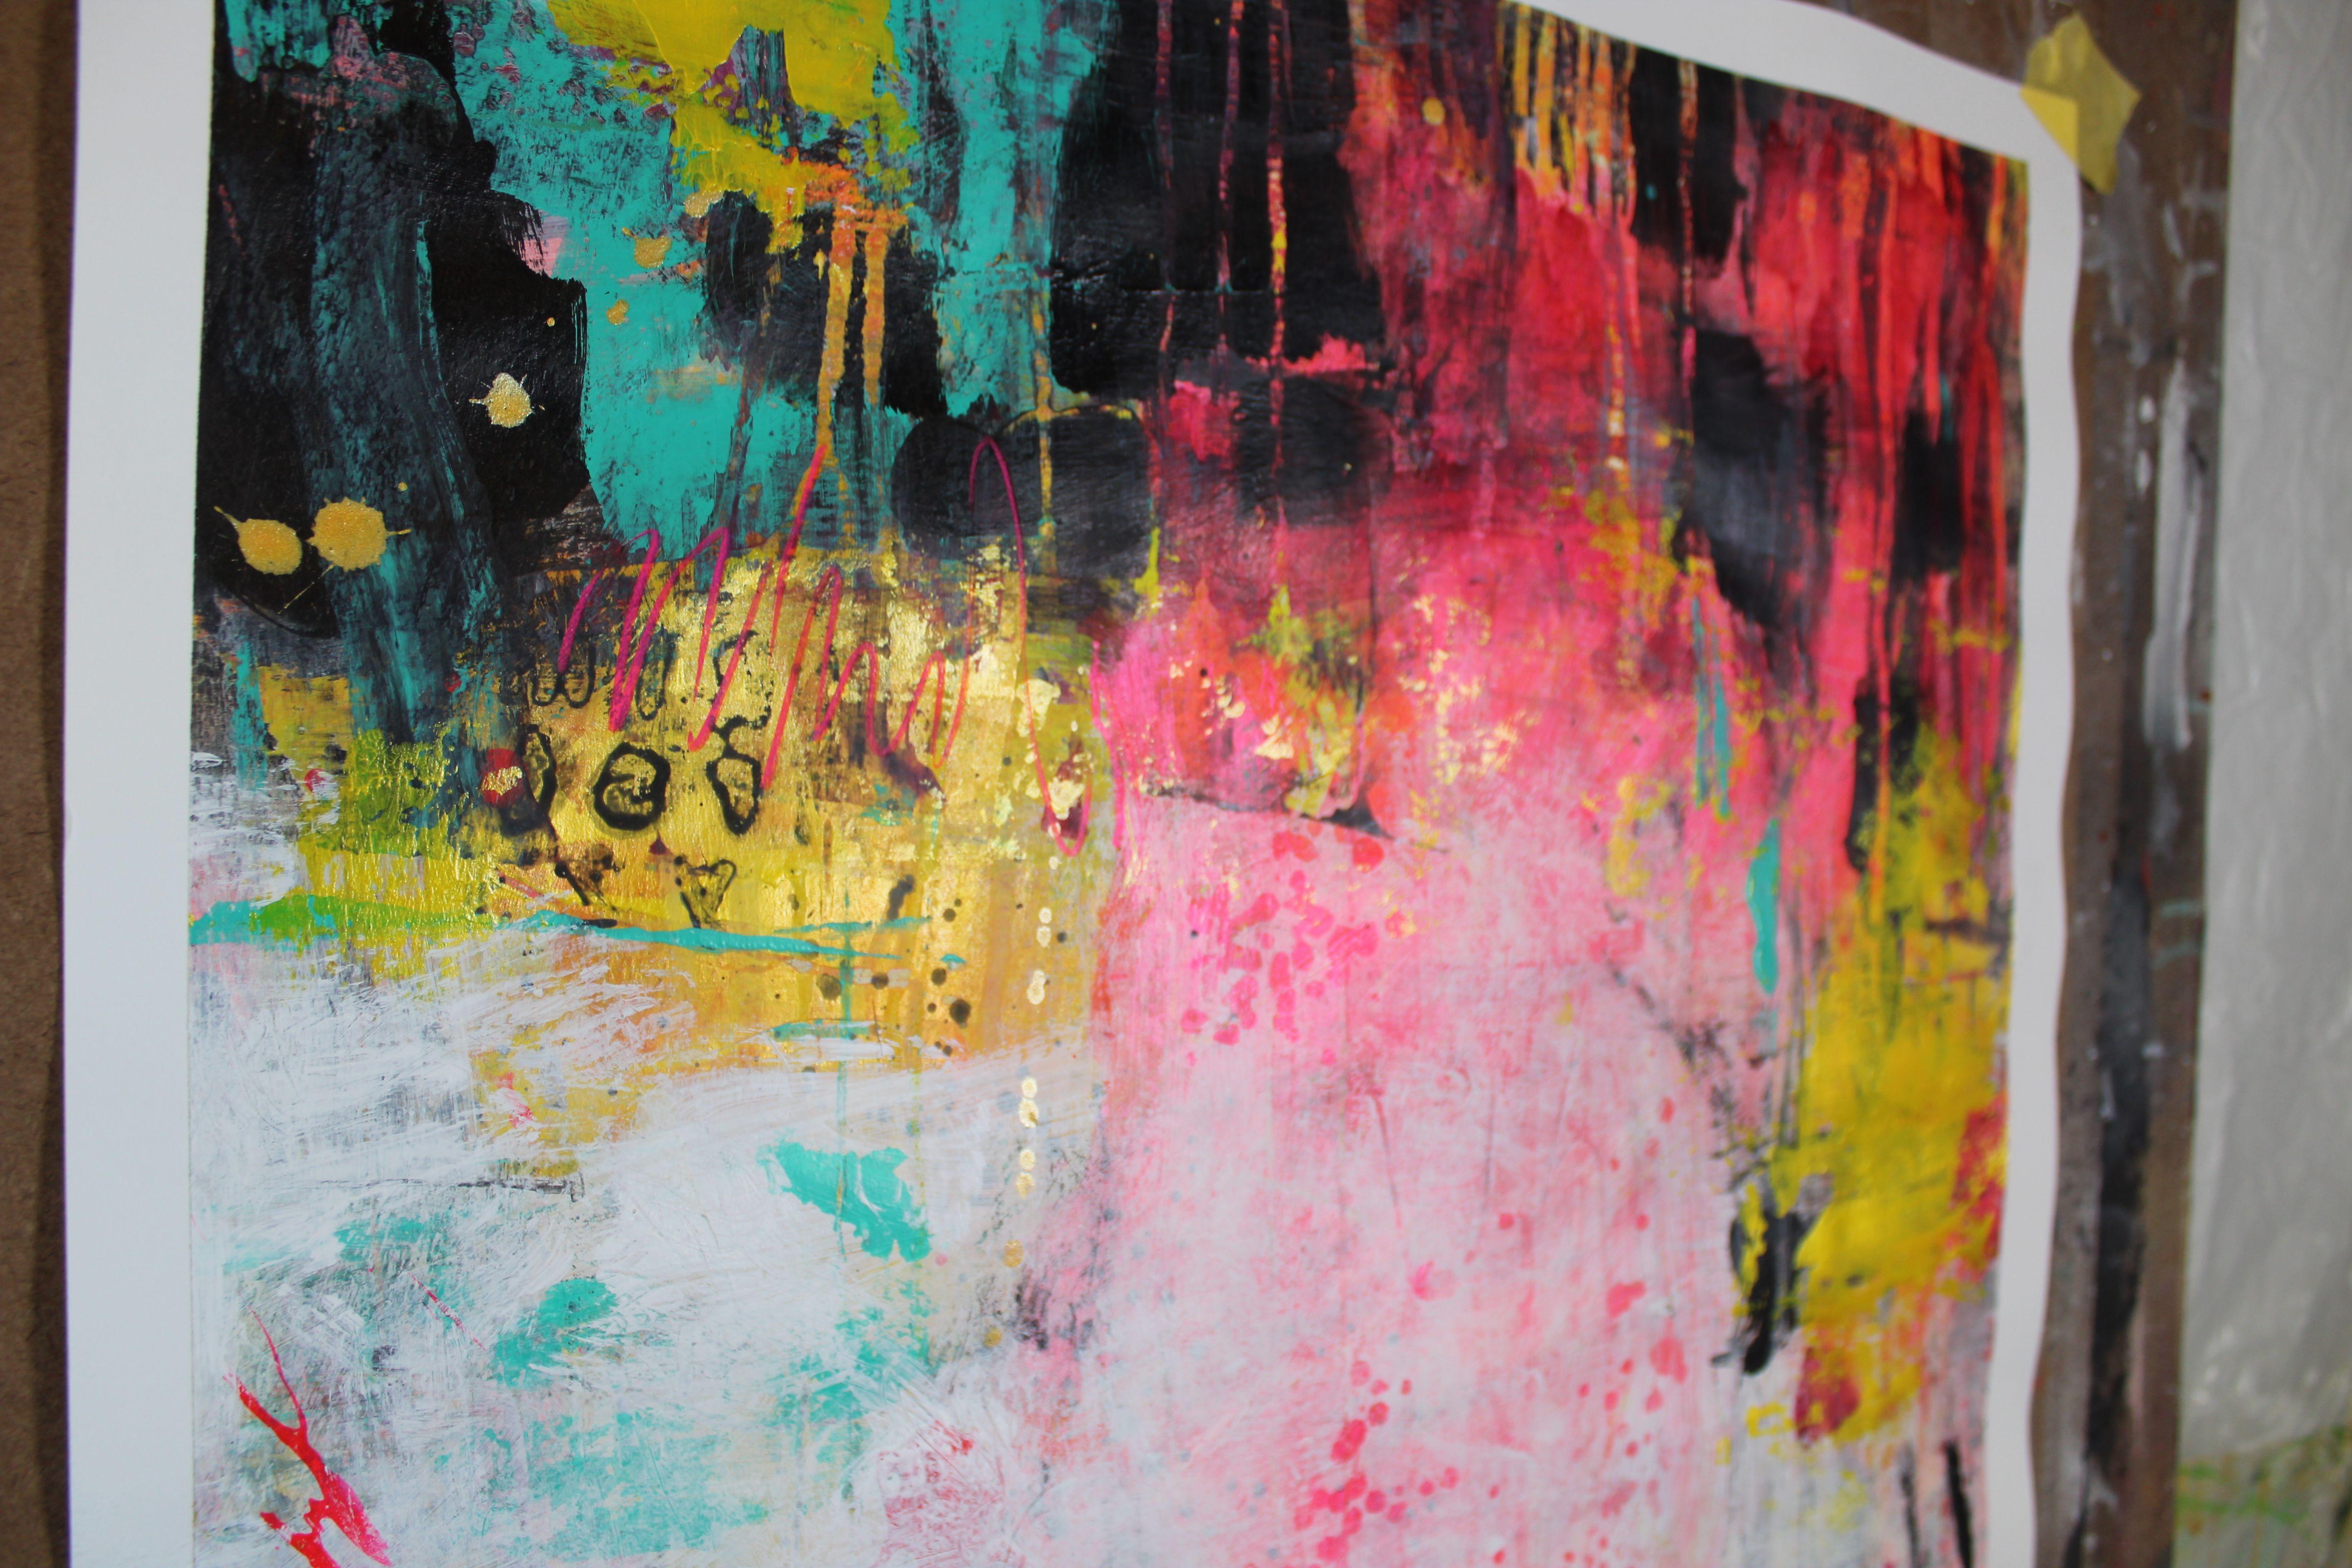 The Language of Love 3, Mixed Media on Paper - Abstract Mixed Media Art by Laura Spring